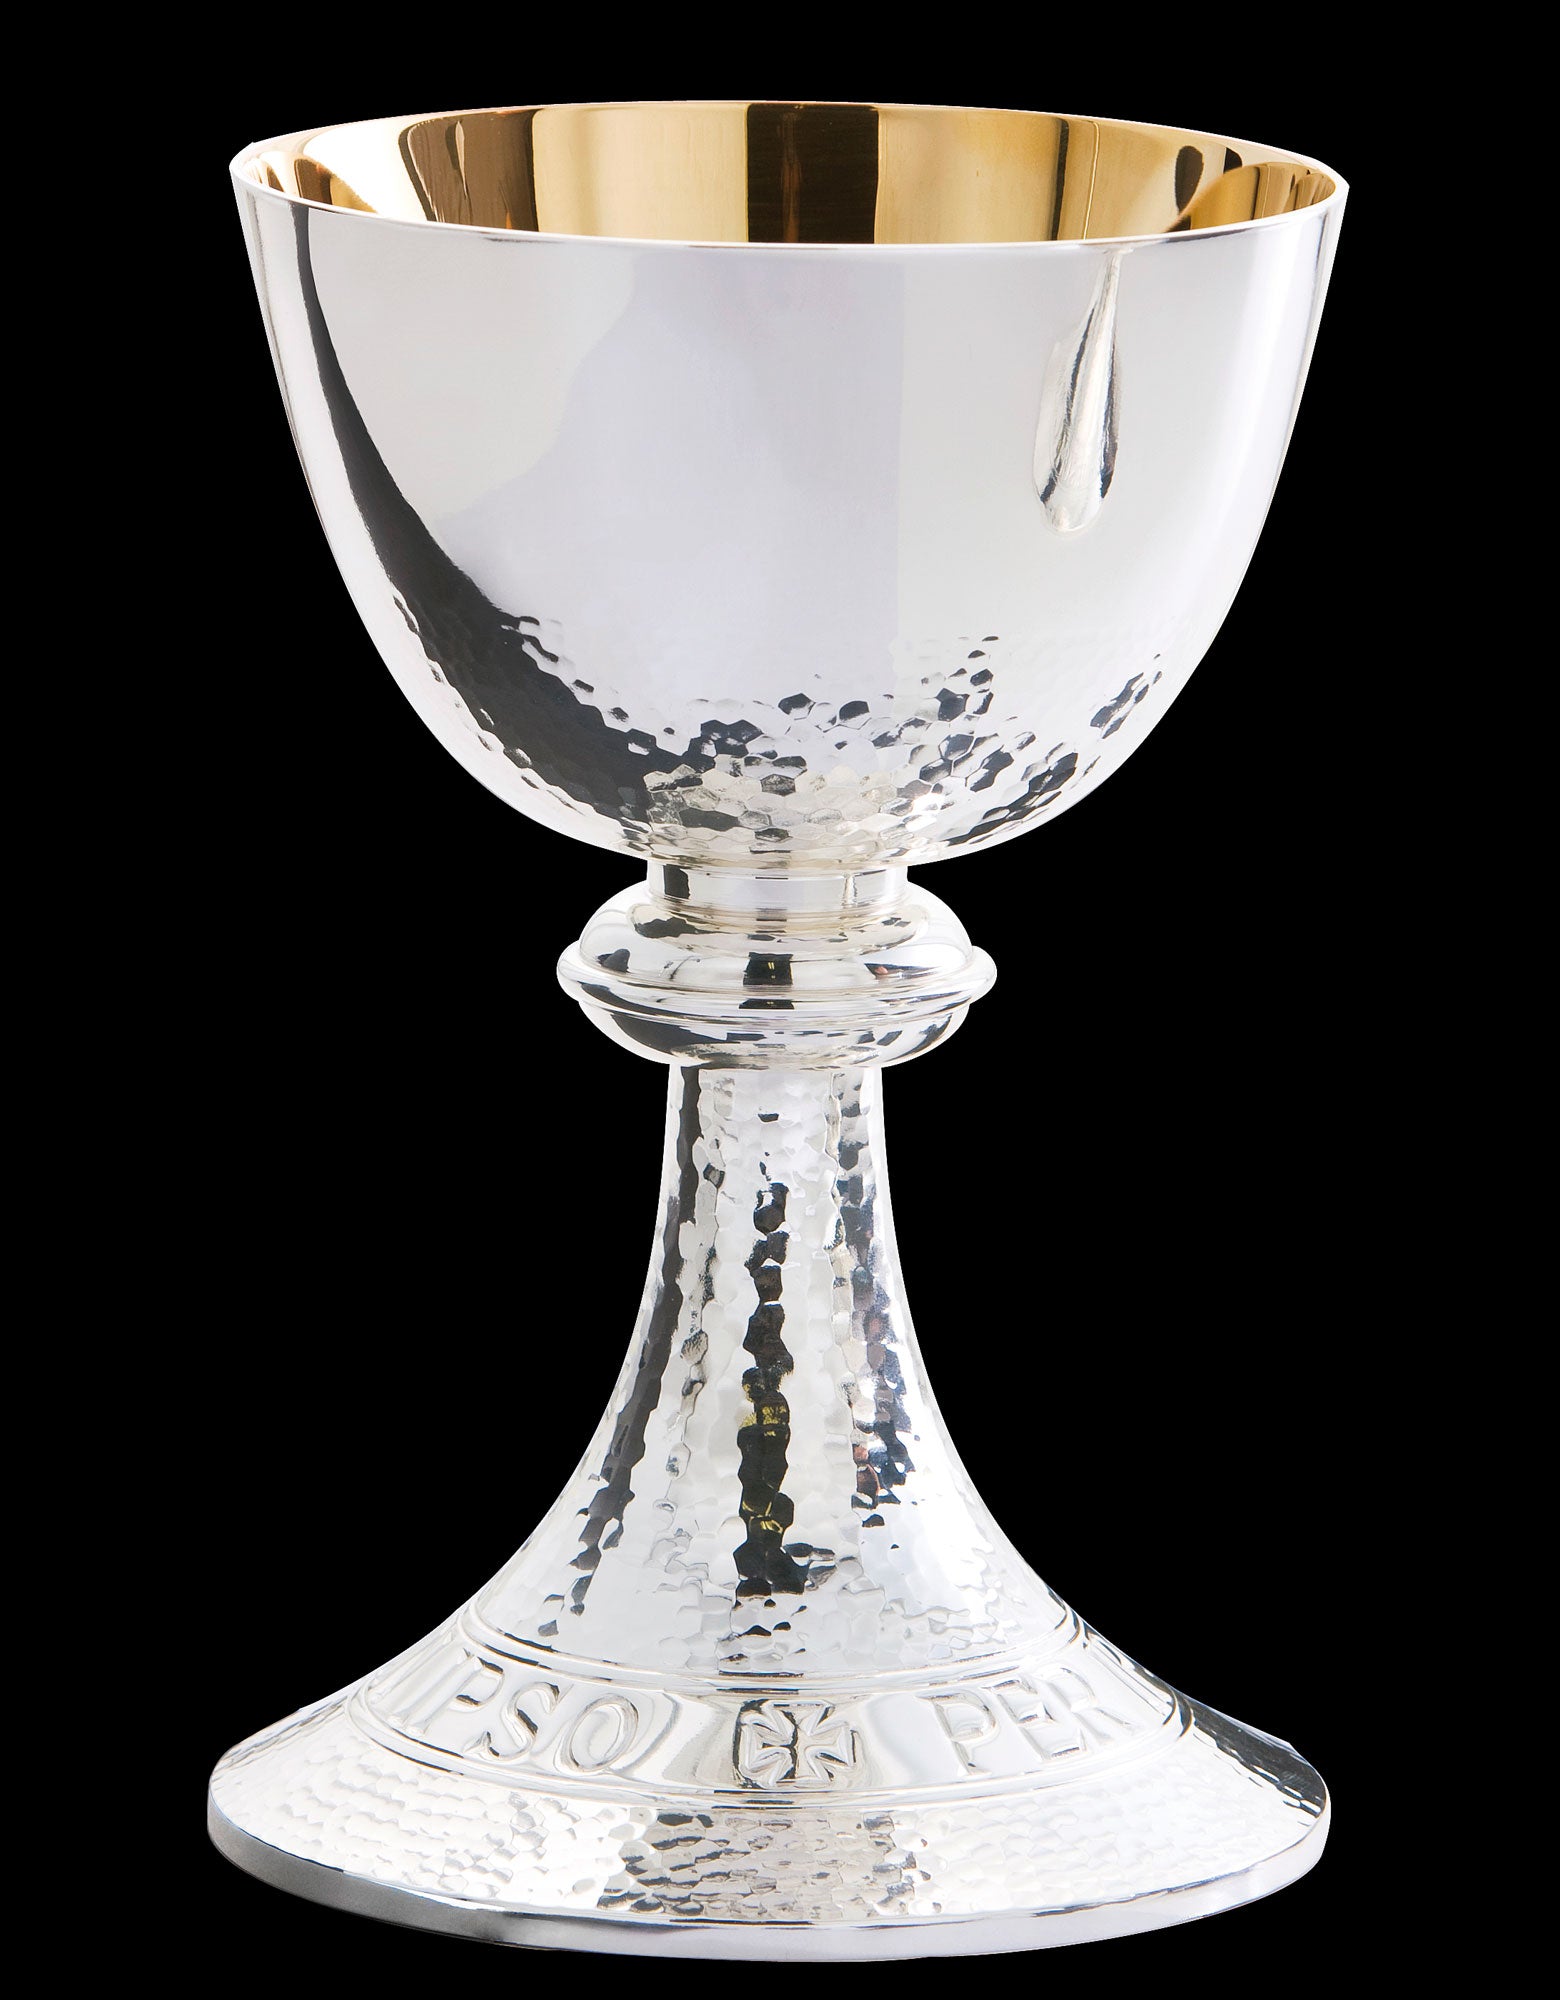 silver-chalice-through-him-with-him-in-him-2495.jpg